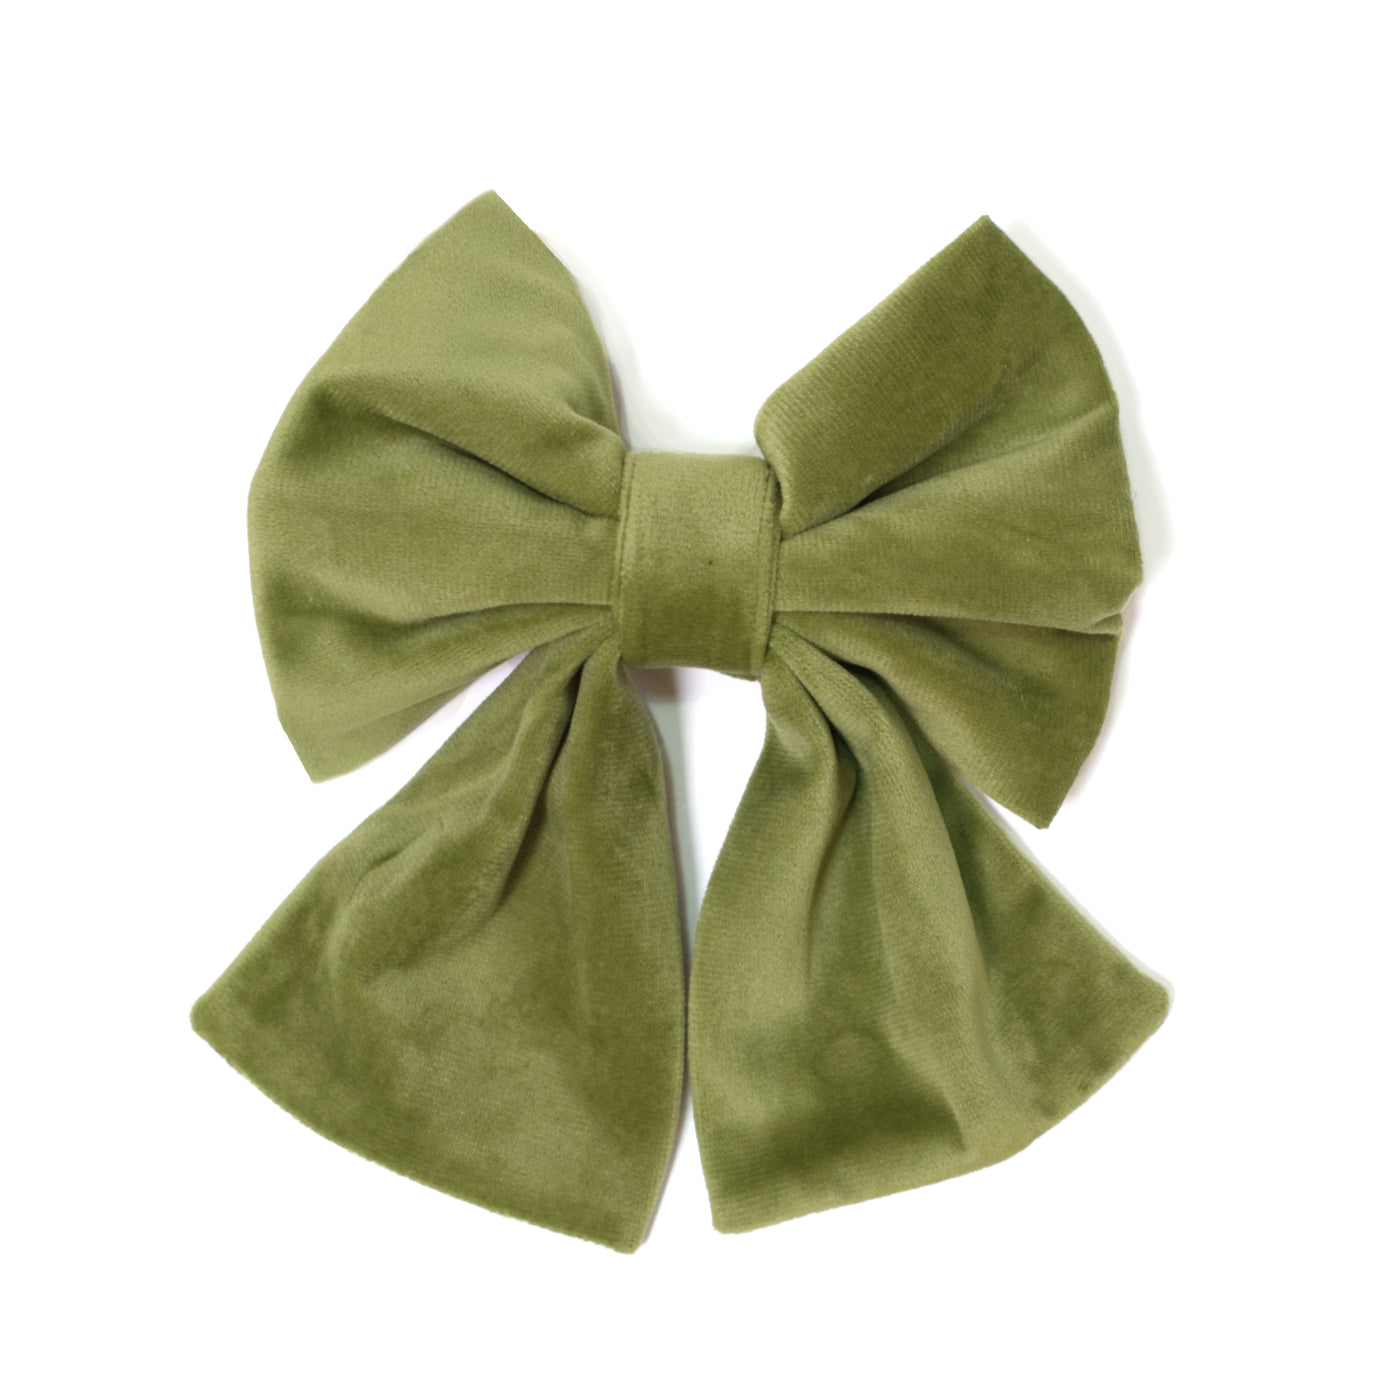 Meadow green velvet sailor dog bow for collars or harnesses